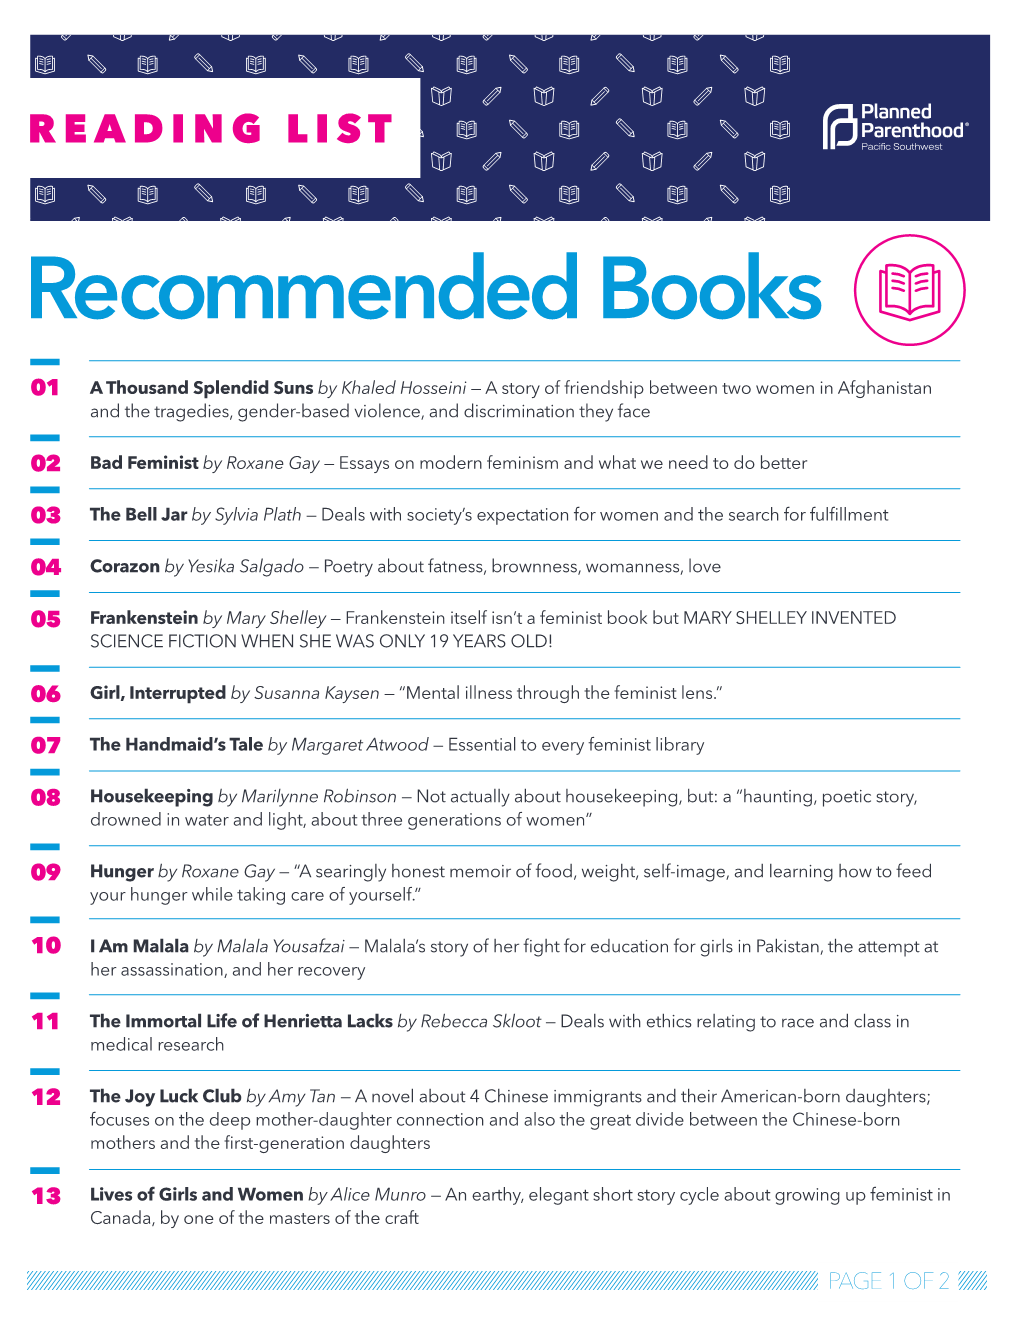 Recommended Books